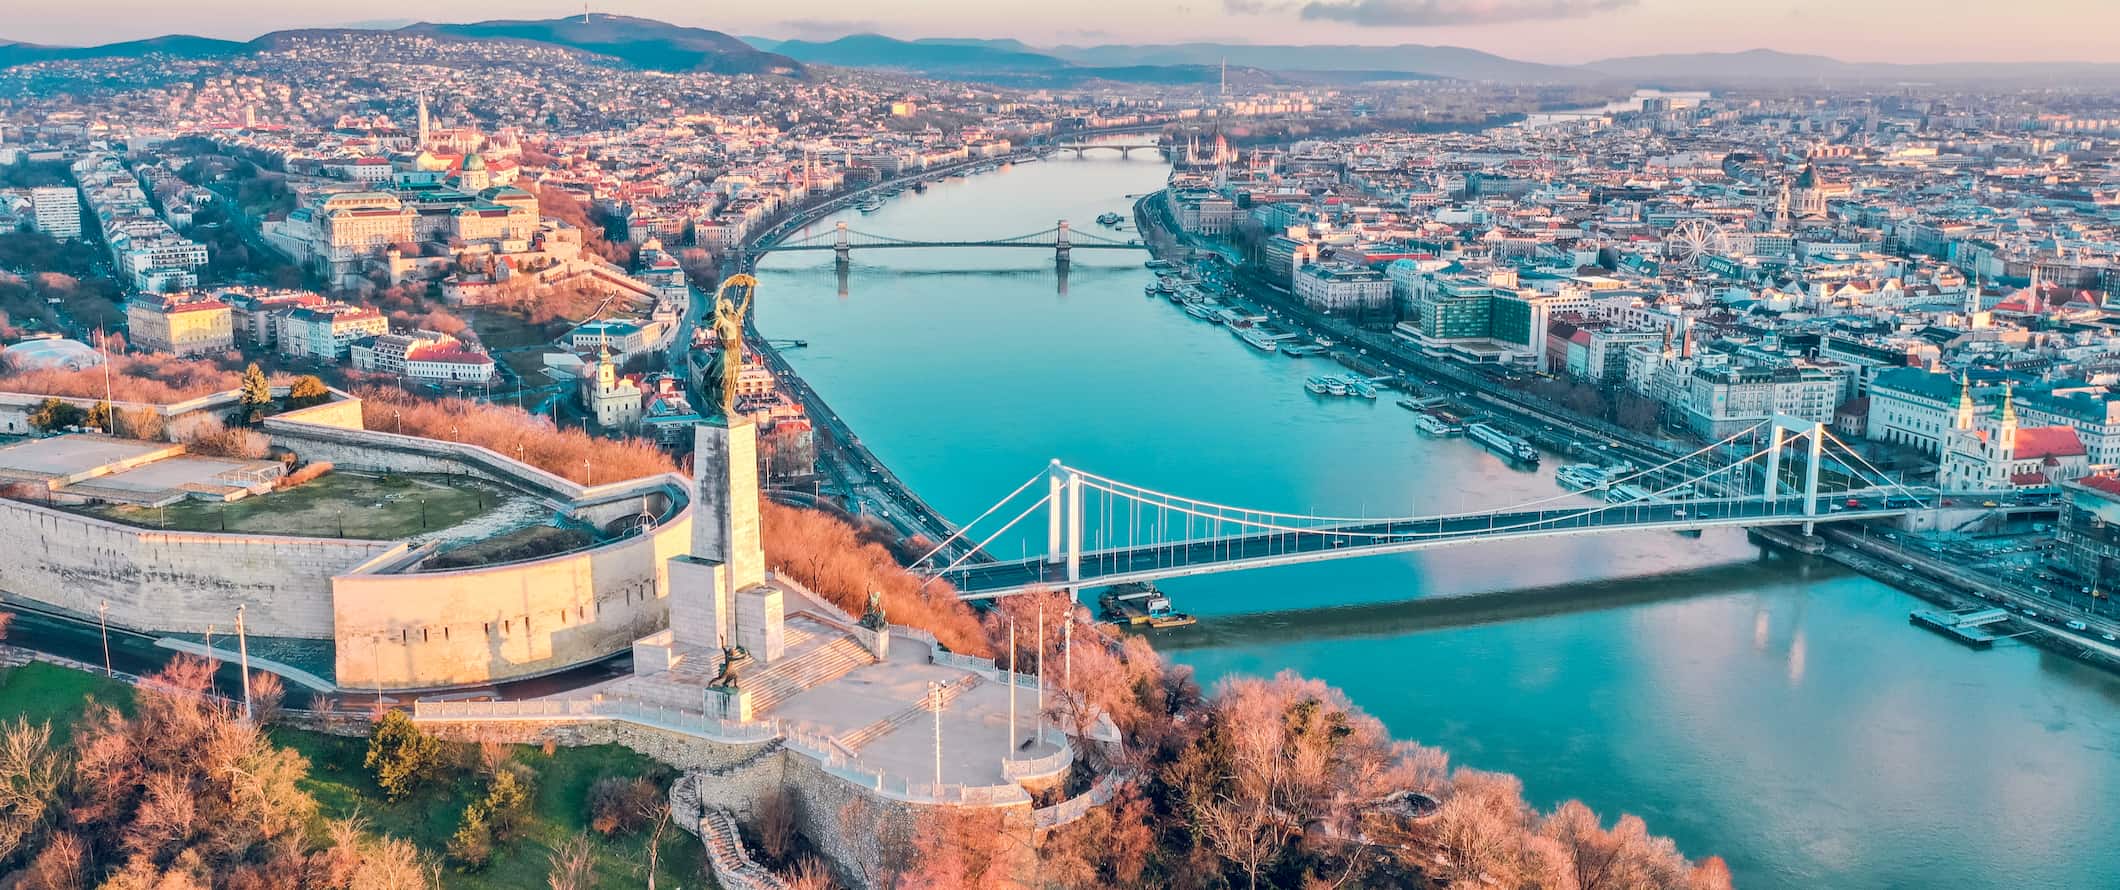 A view overlooking Budapest, Hungary from above, featuring historic buildings and the beautiful Danube